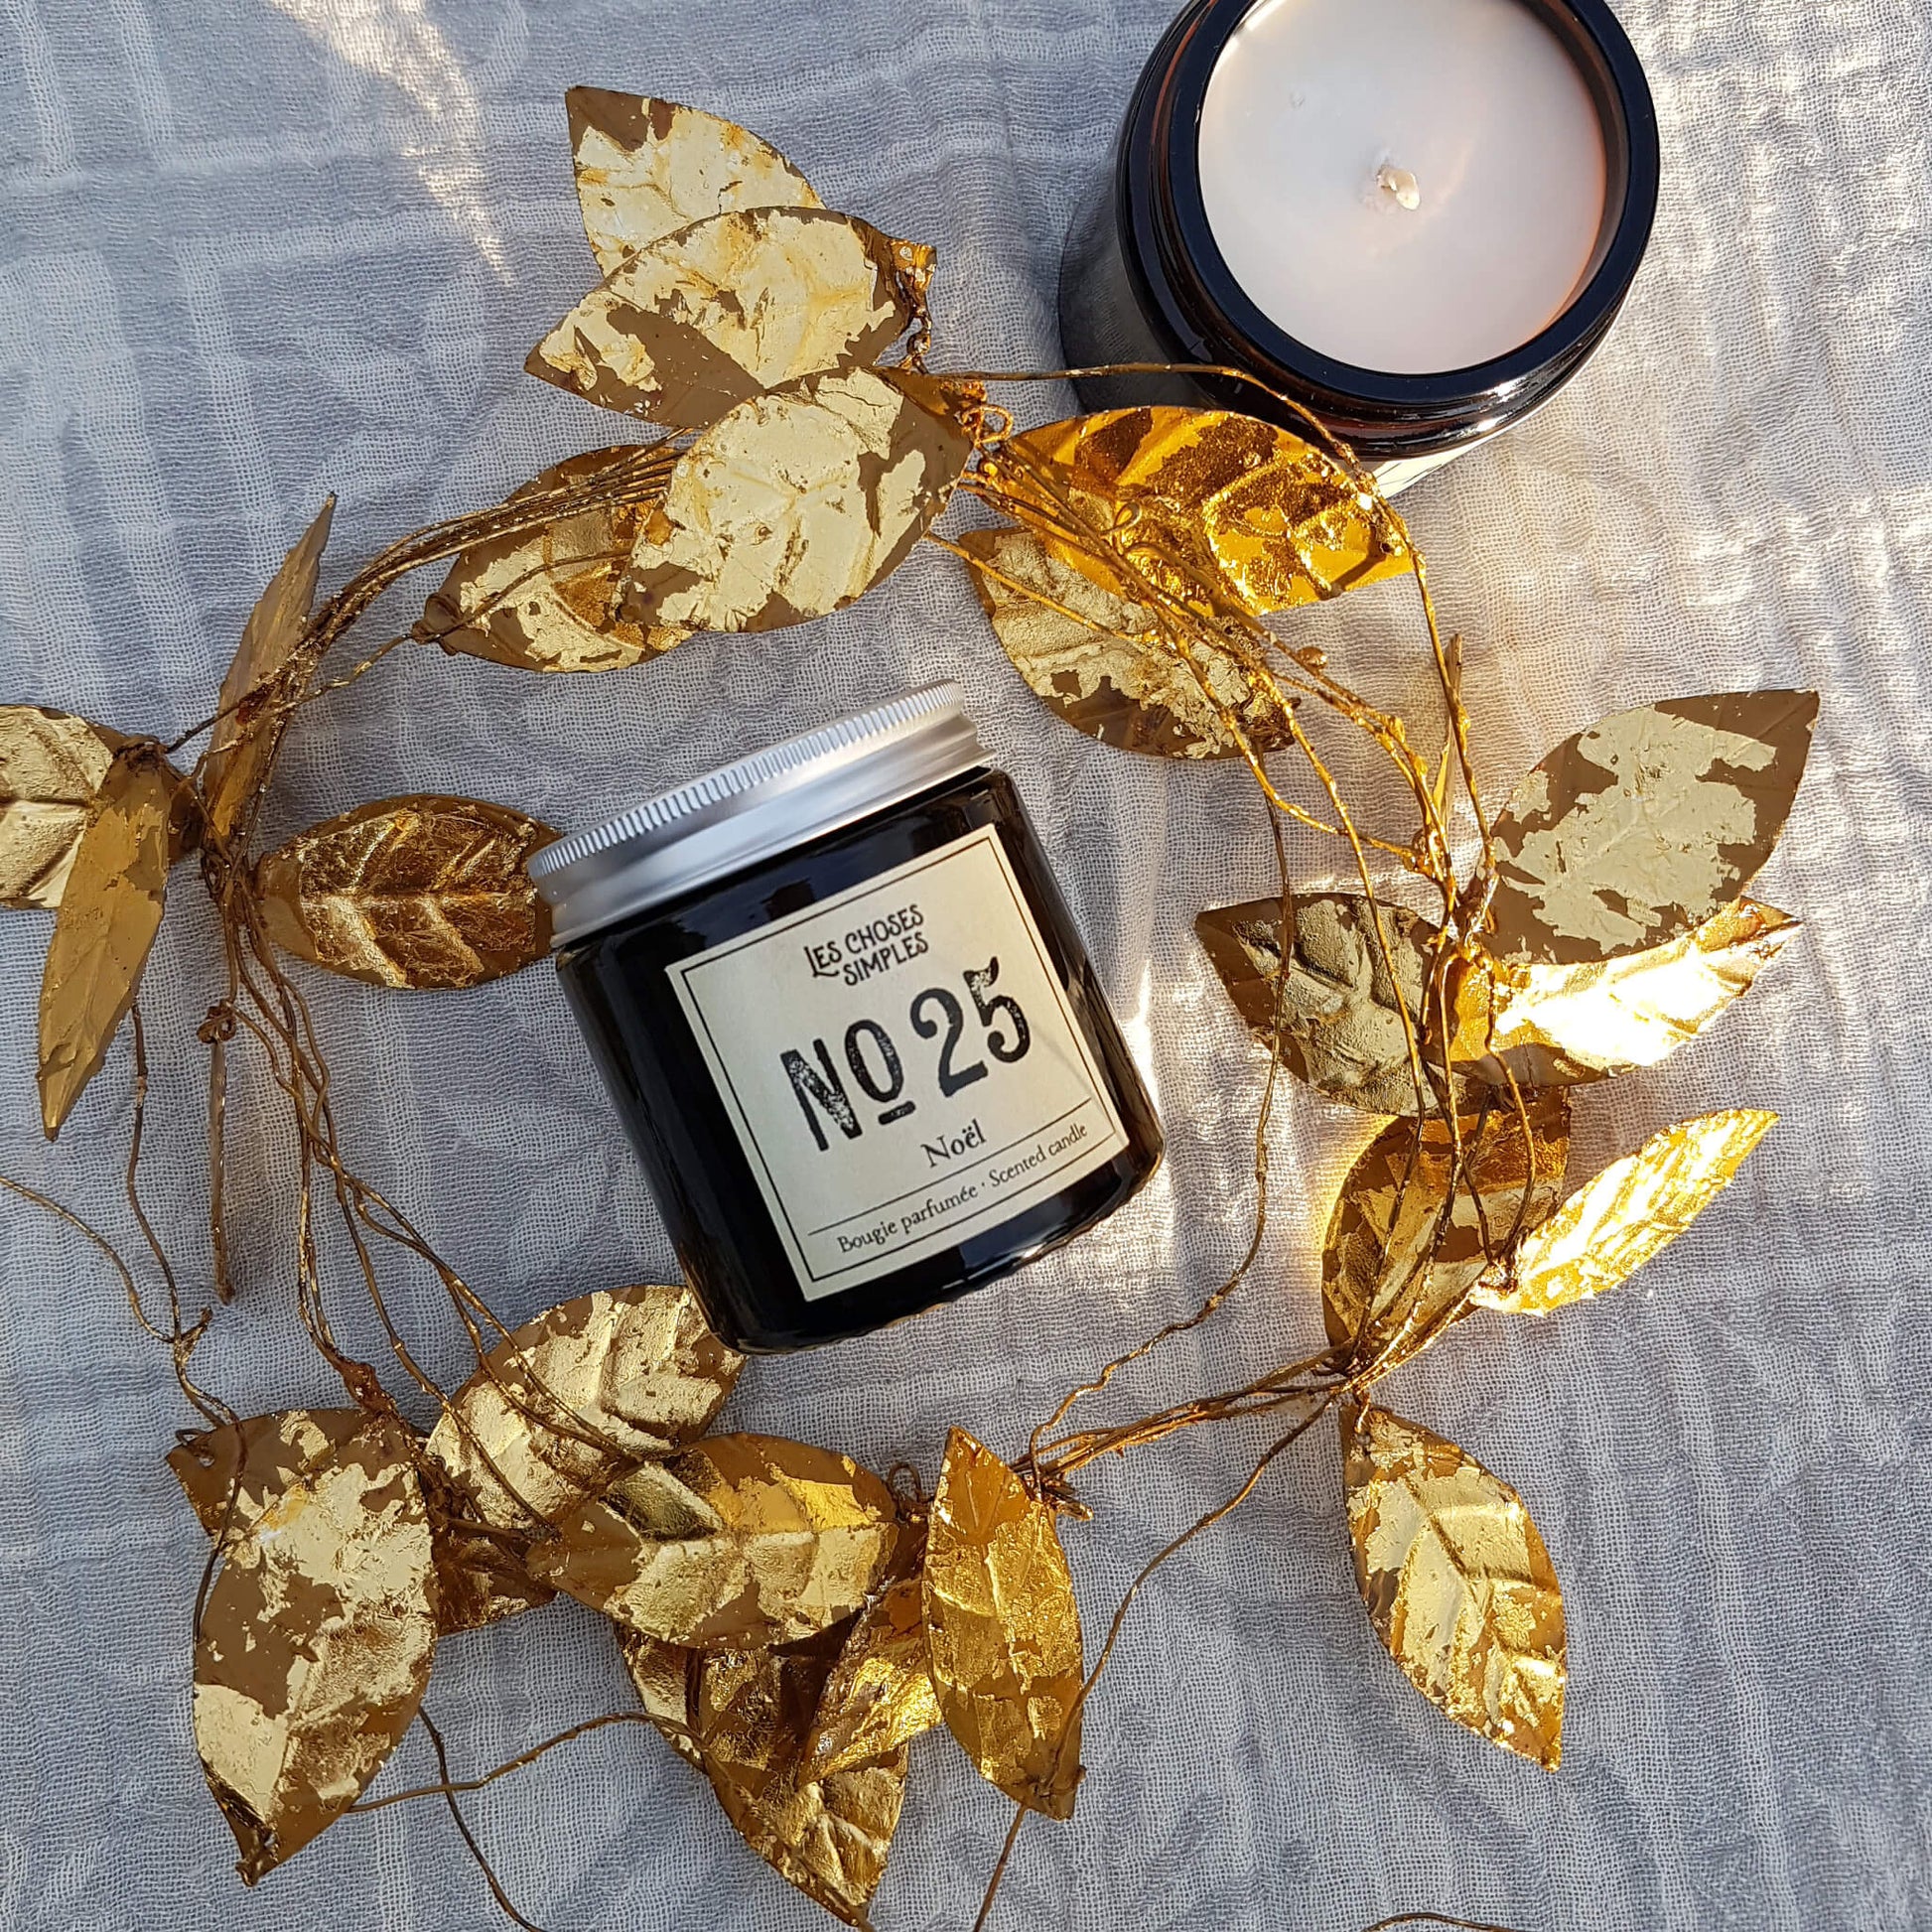 Small size Scented Candle "Christmas" - No 25 Noël - Unik by Nature